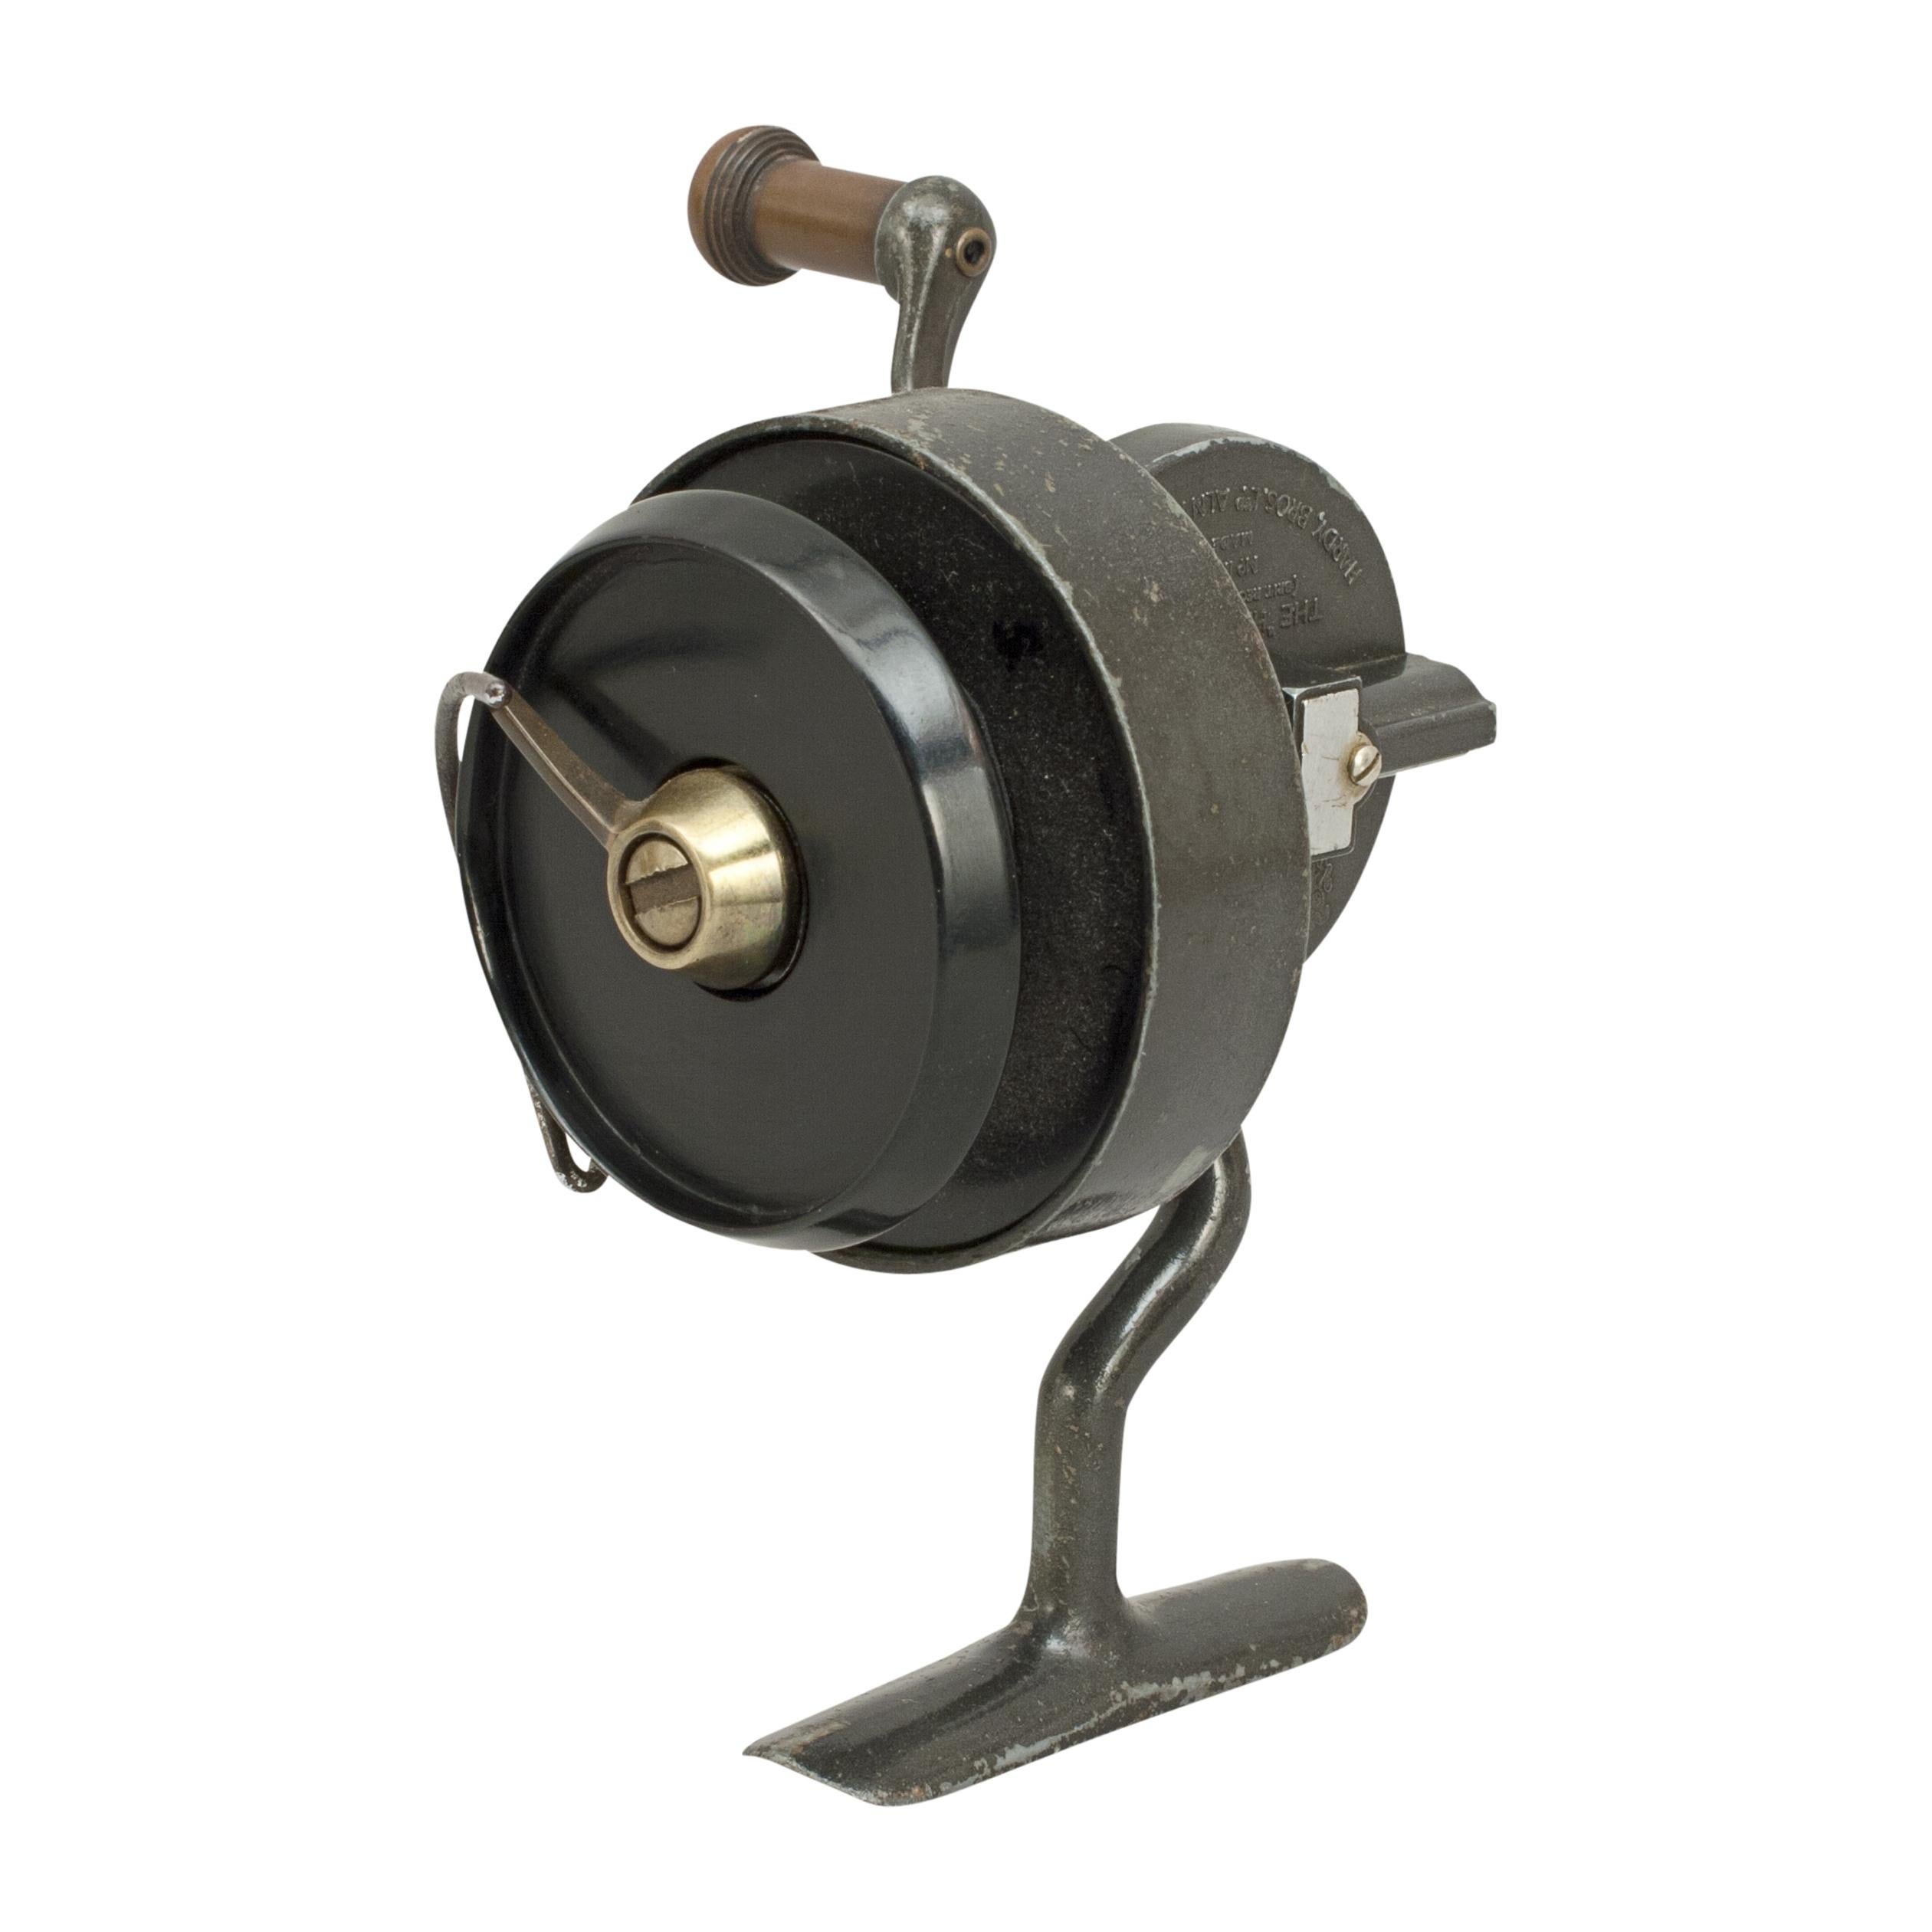 Hardy Hardex fishing reel.
A great fixed spool fishing reel by Hardy of Alnwick, England. The reel is is very good condition with half bale arm, a bakelite spool and brass drag. The side plate has the coat of arms of King George V with the Prince